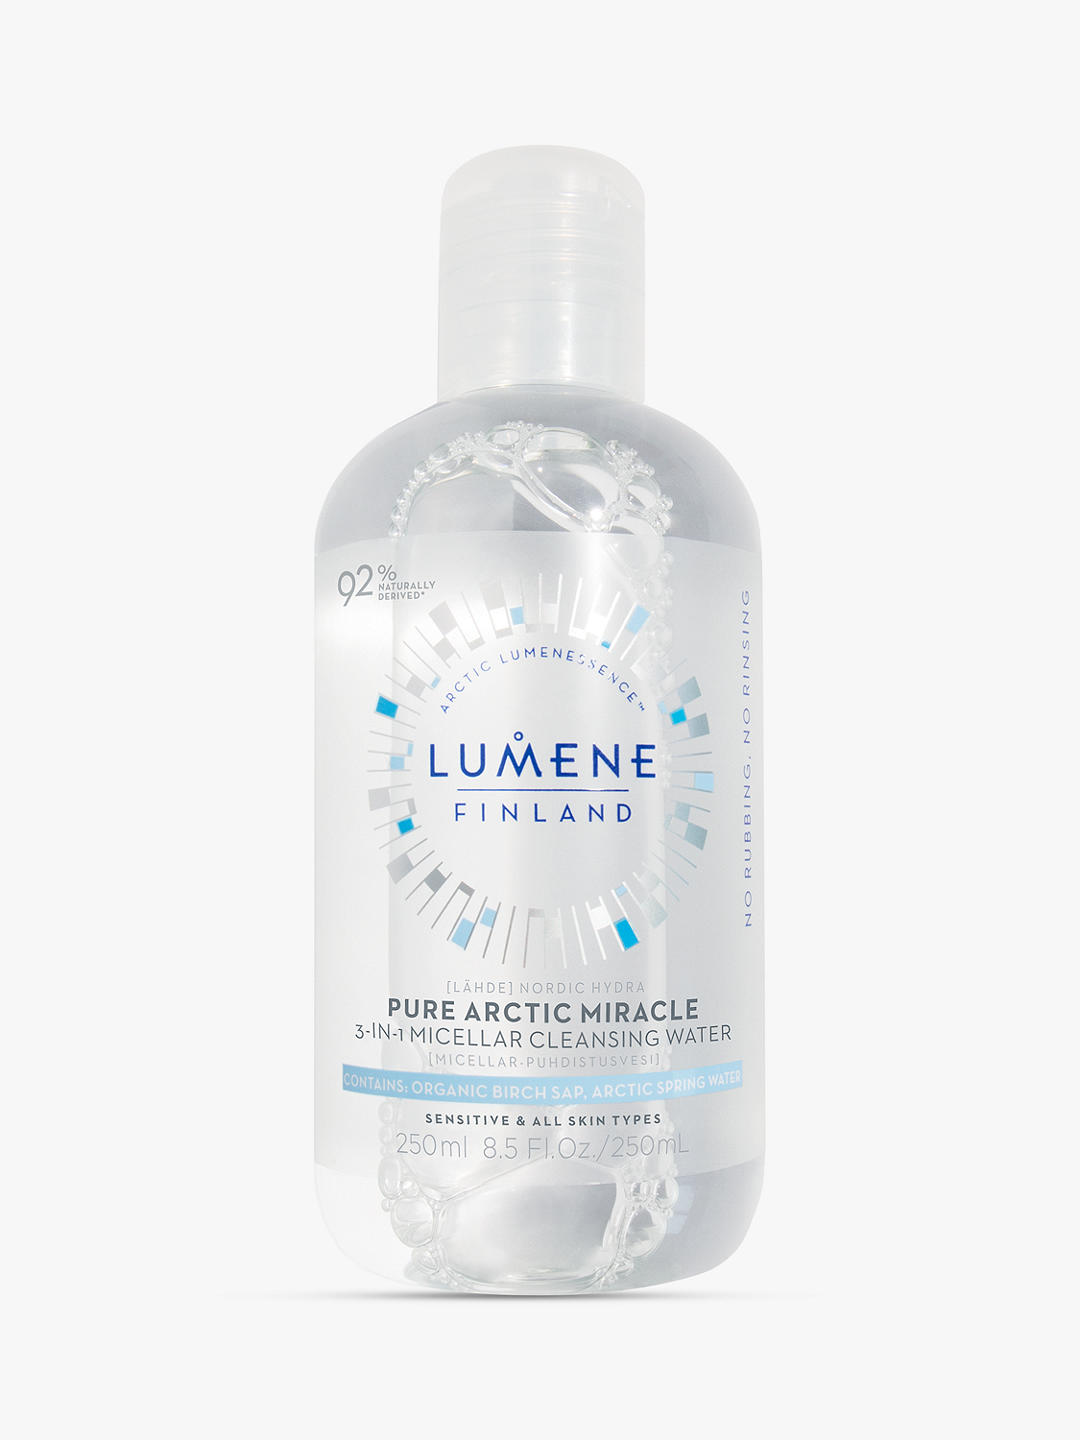 Lumene Nordic Hydra Pure Arctic Miracle 3-In-1 Cleansing Water, 250ml 1